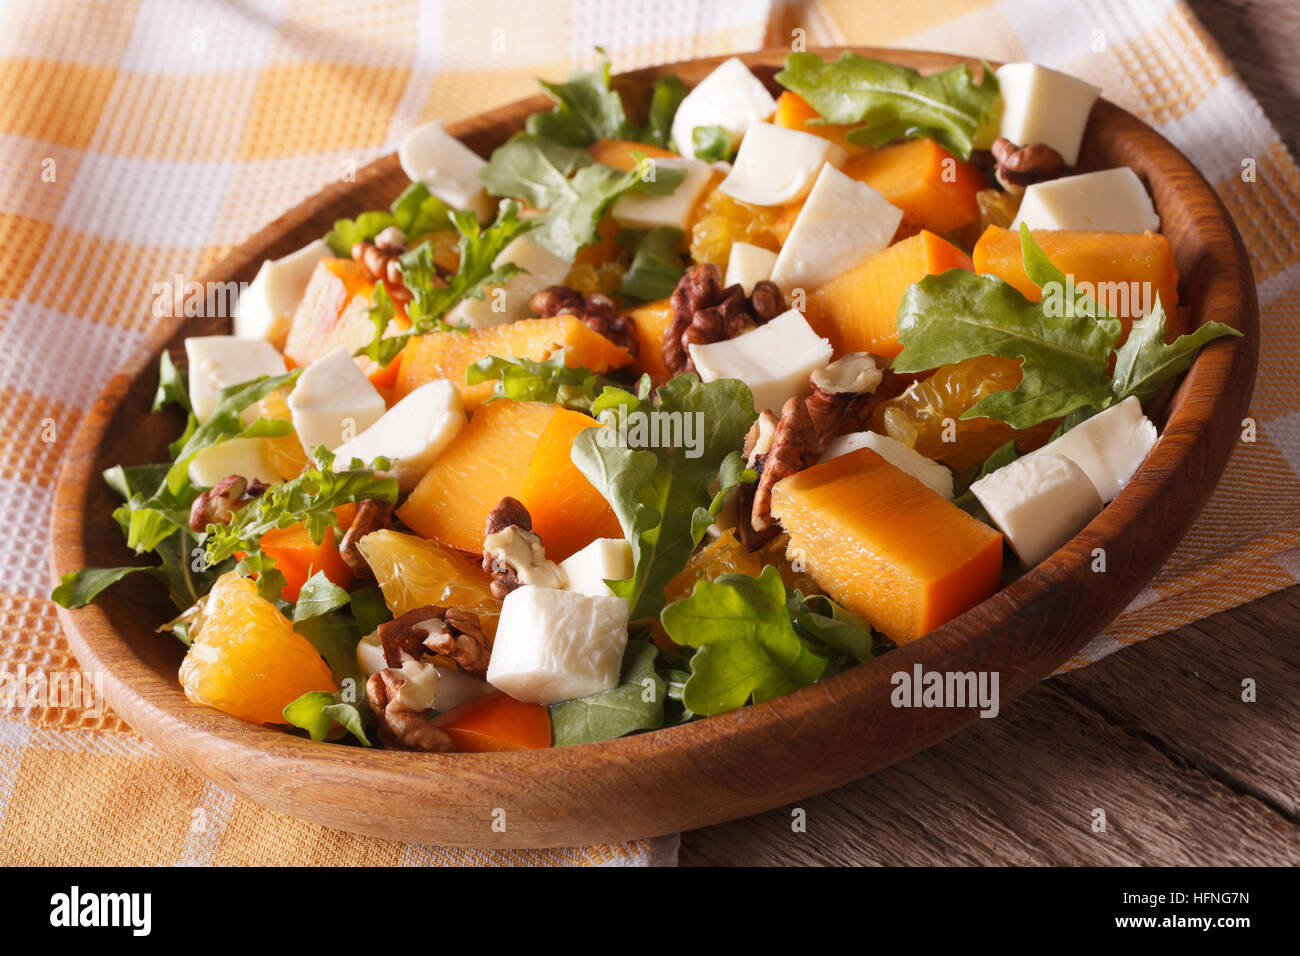 salad with persimmon, arugula, oranges and cheese close-up on a plate. horizontal Stock Photo